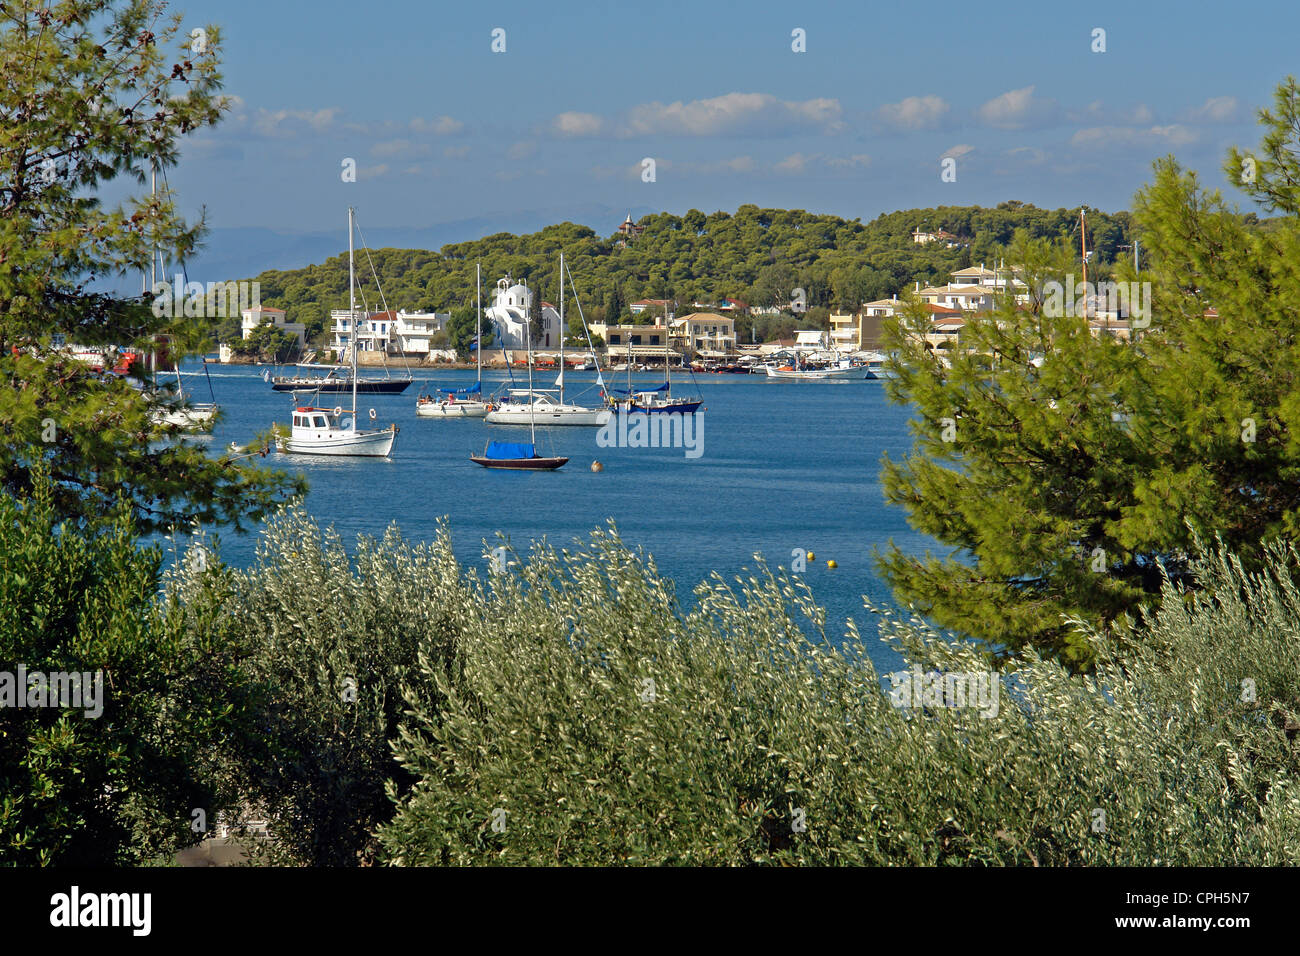 Europe, Greece, Pelepones, Porto Heli, bay, harbour, port, trees, mountains, boats, vehicles, vessels, buildings, constructions, Stock Photo